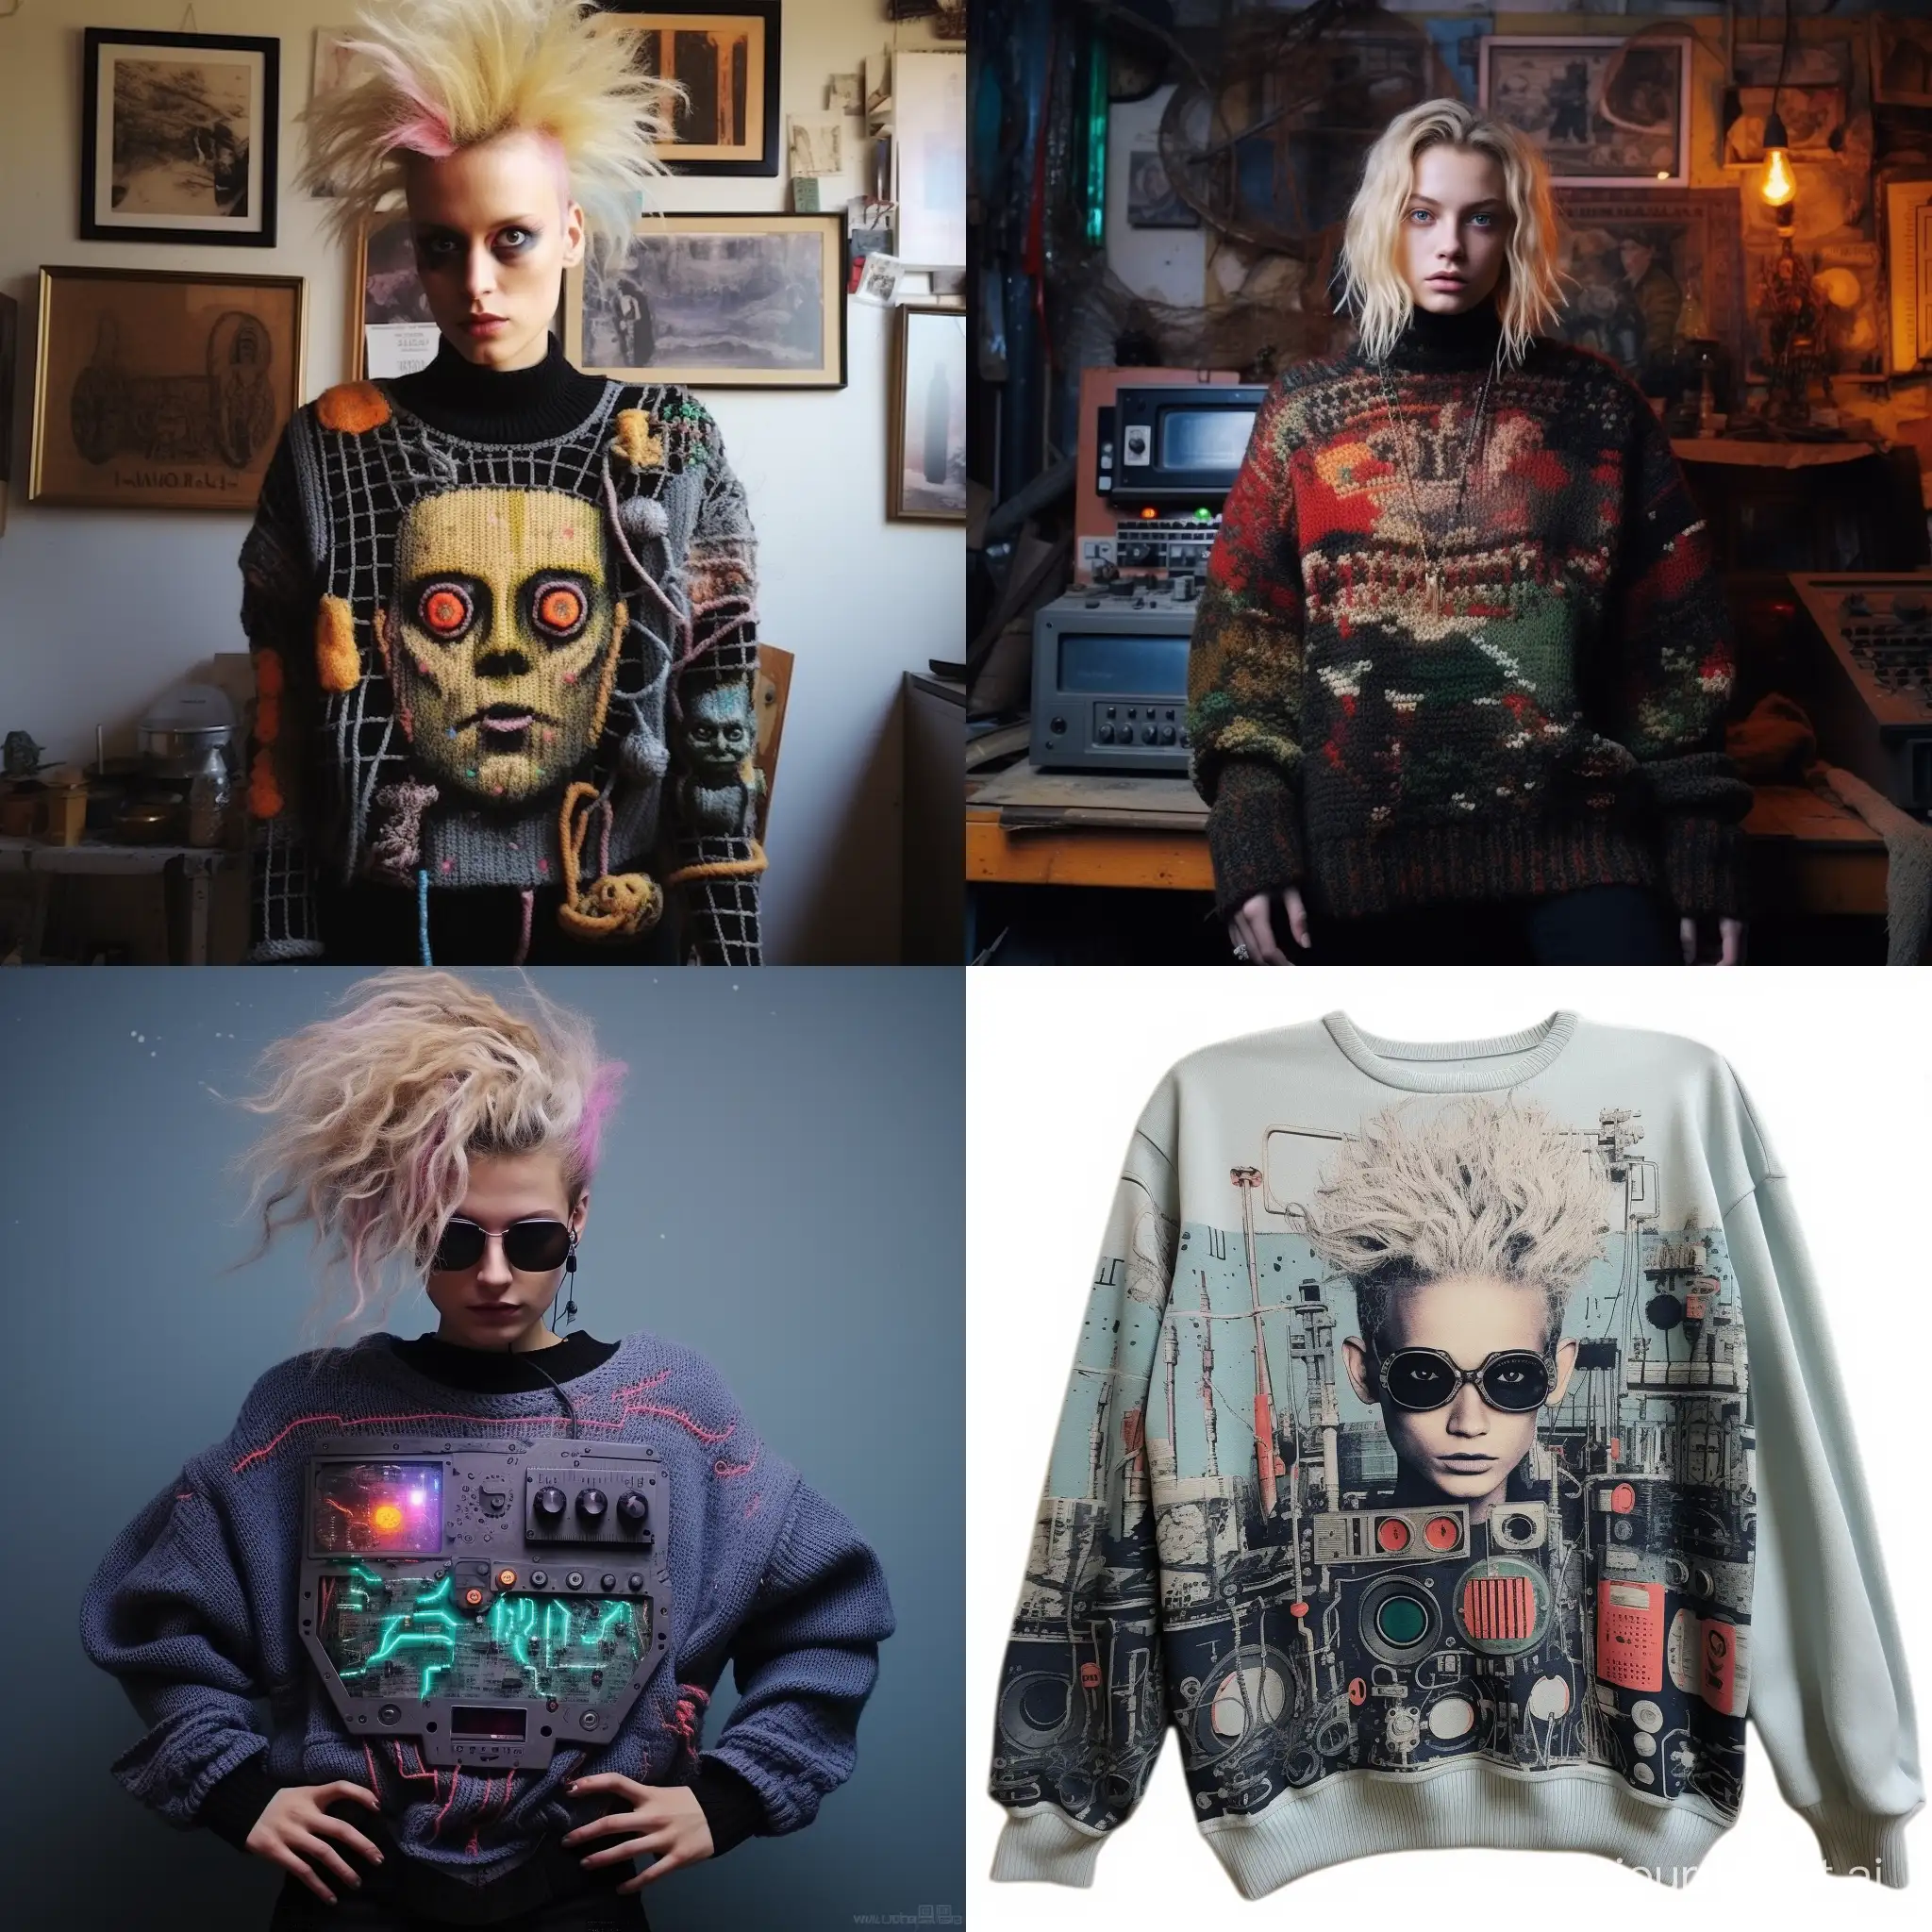 Revolutionary-Punk-Oversized-Knitted-Sweater-Commands-the-World-in-80s-Style